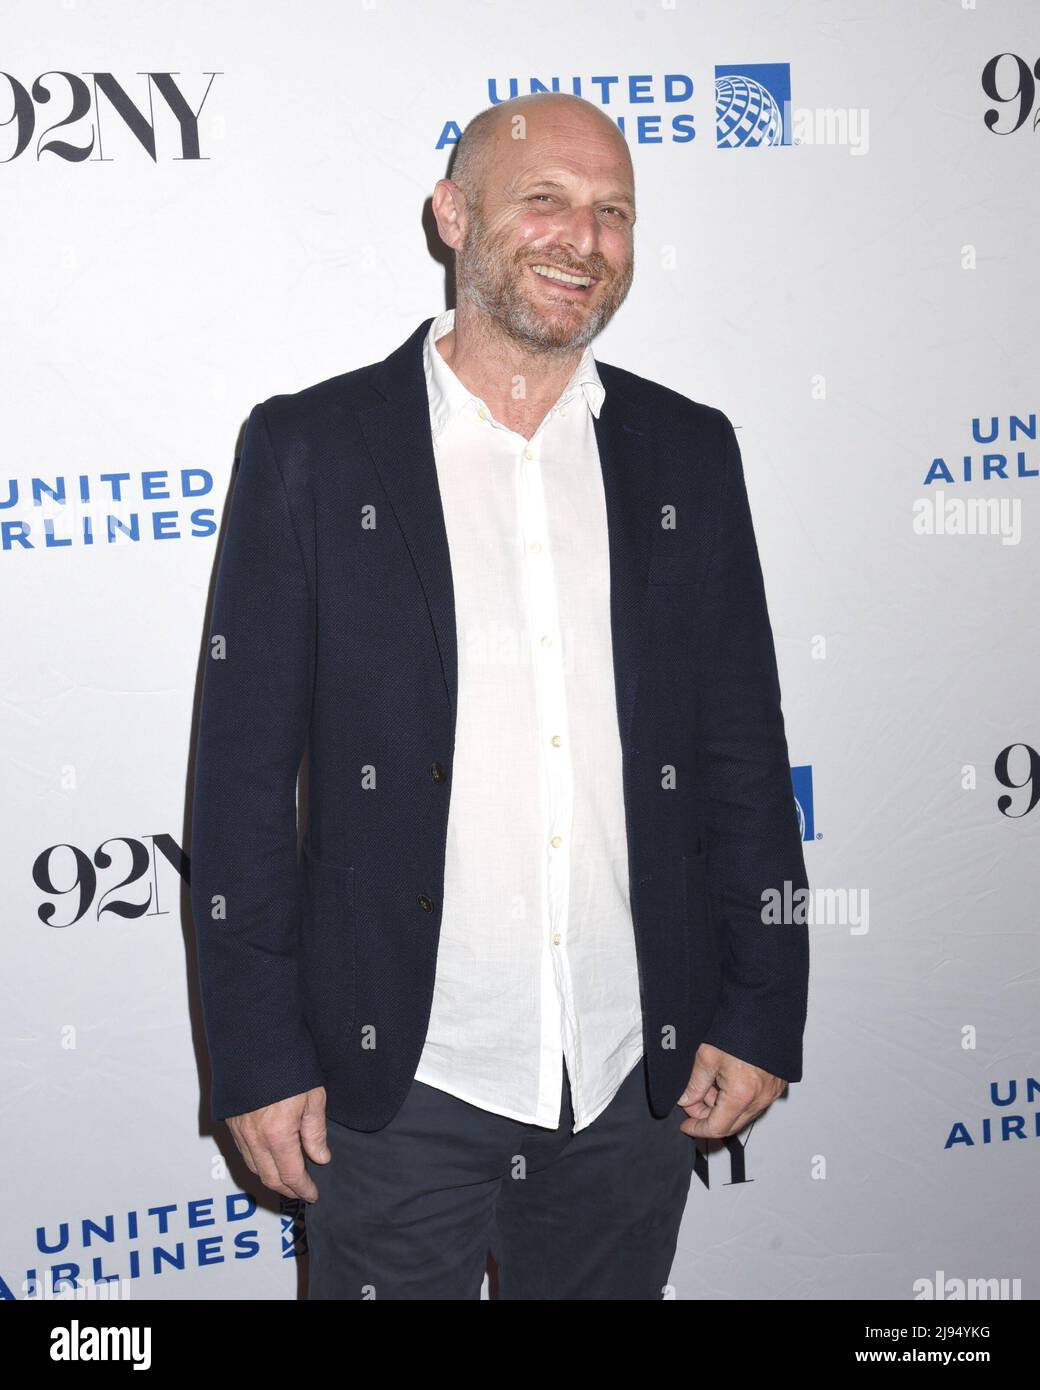 New York, NY, USA. 19th May, 2022. Hagai Levi in attendance for HBO's SCENES FROM A MARRIAGE at 92Y, The 92nd Street Y, New York, NY May 19, 2022. Credit: Quoin Pics/Everett Collection/Alamy Live News Stock Photo